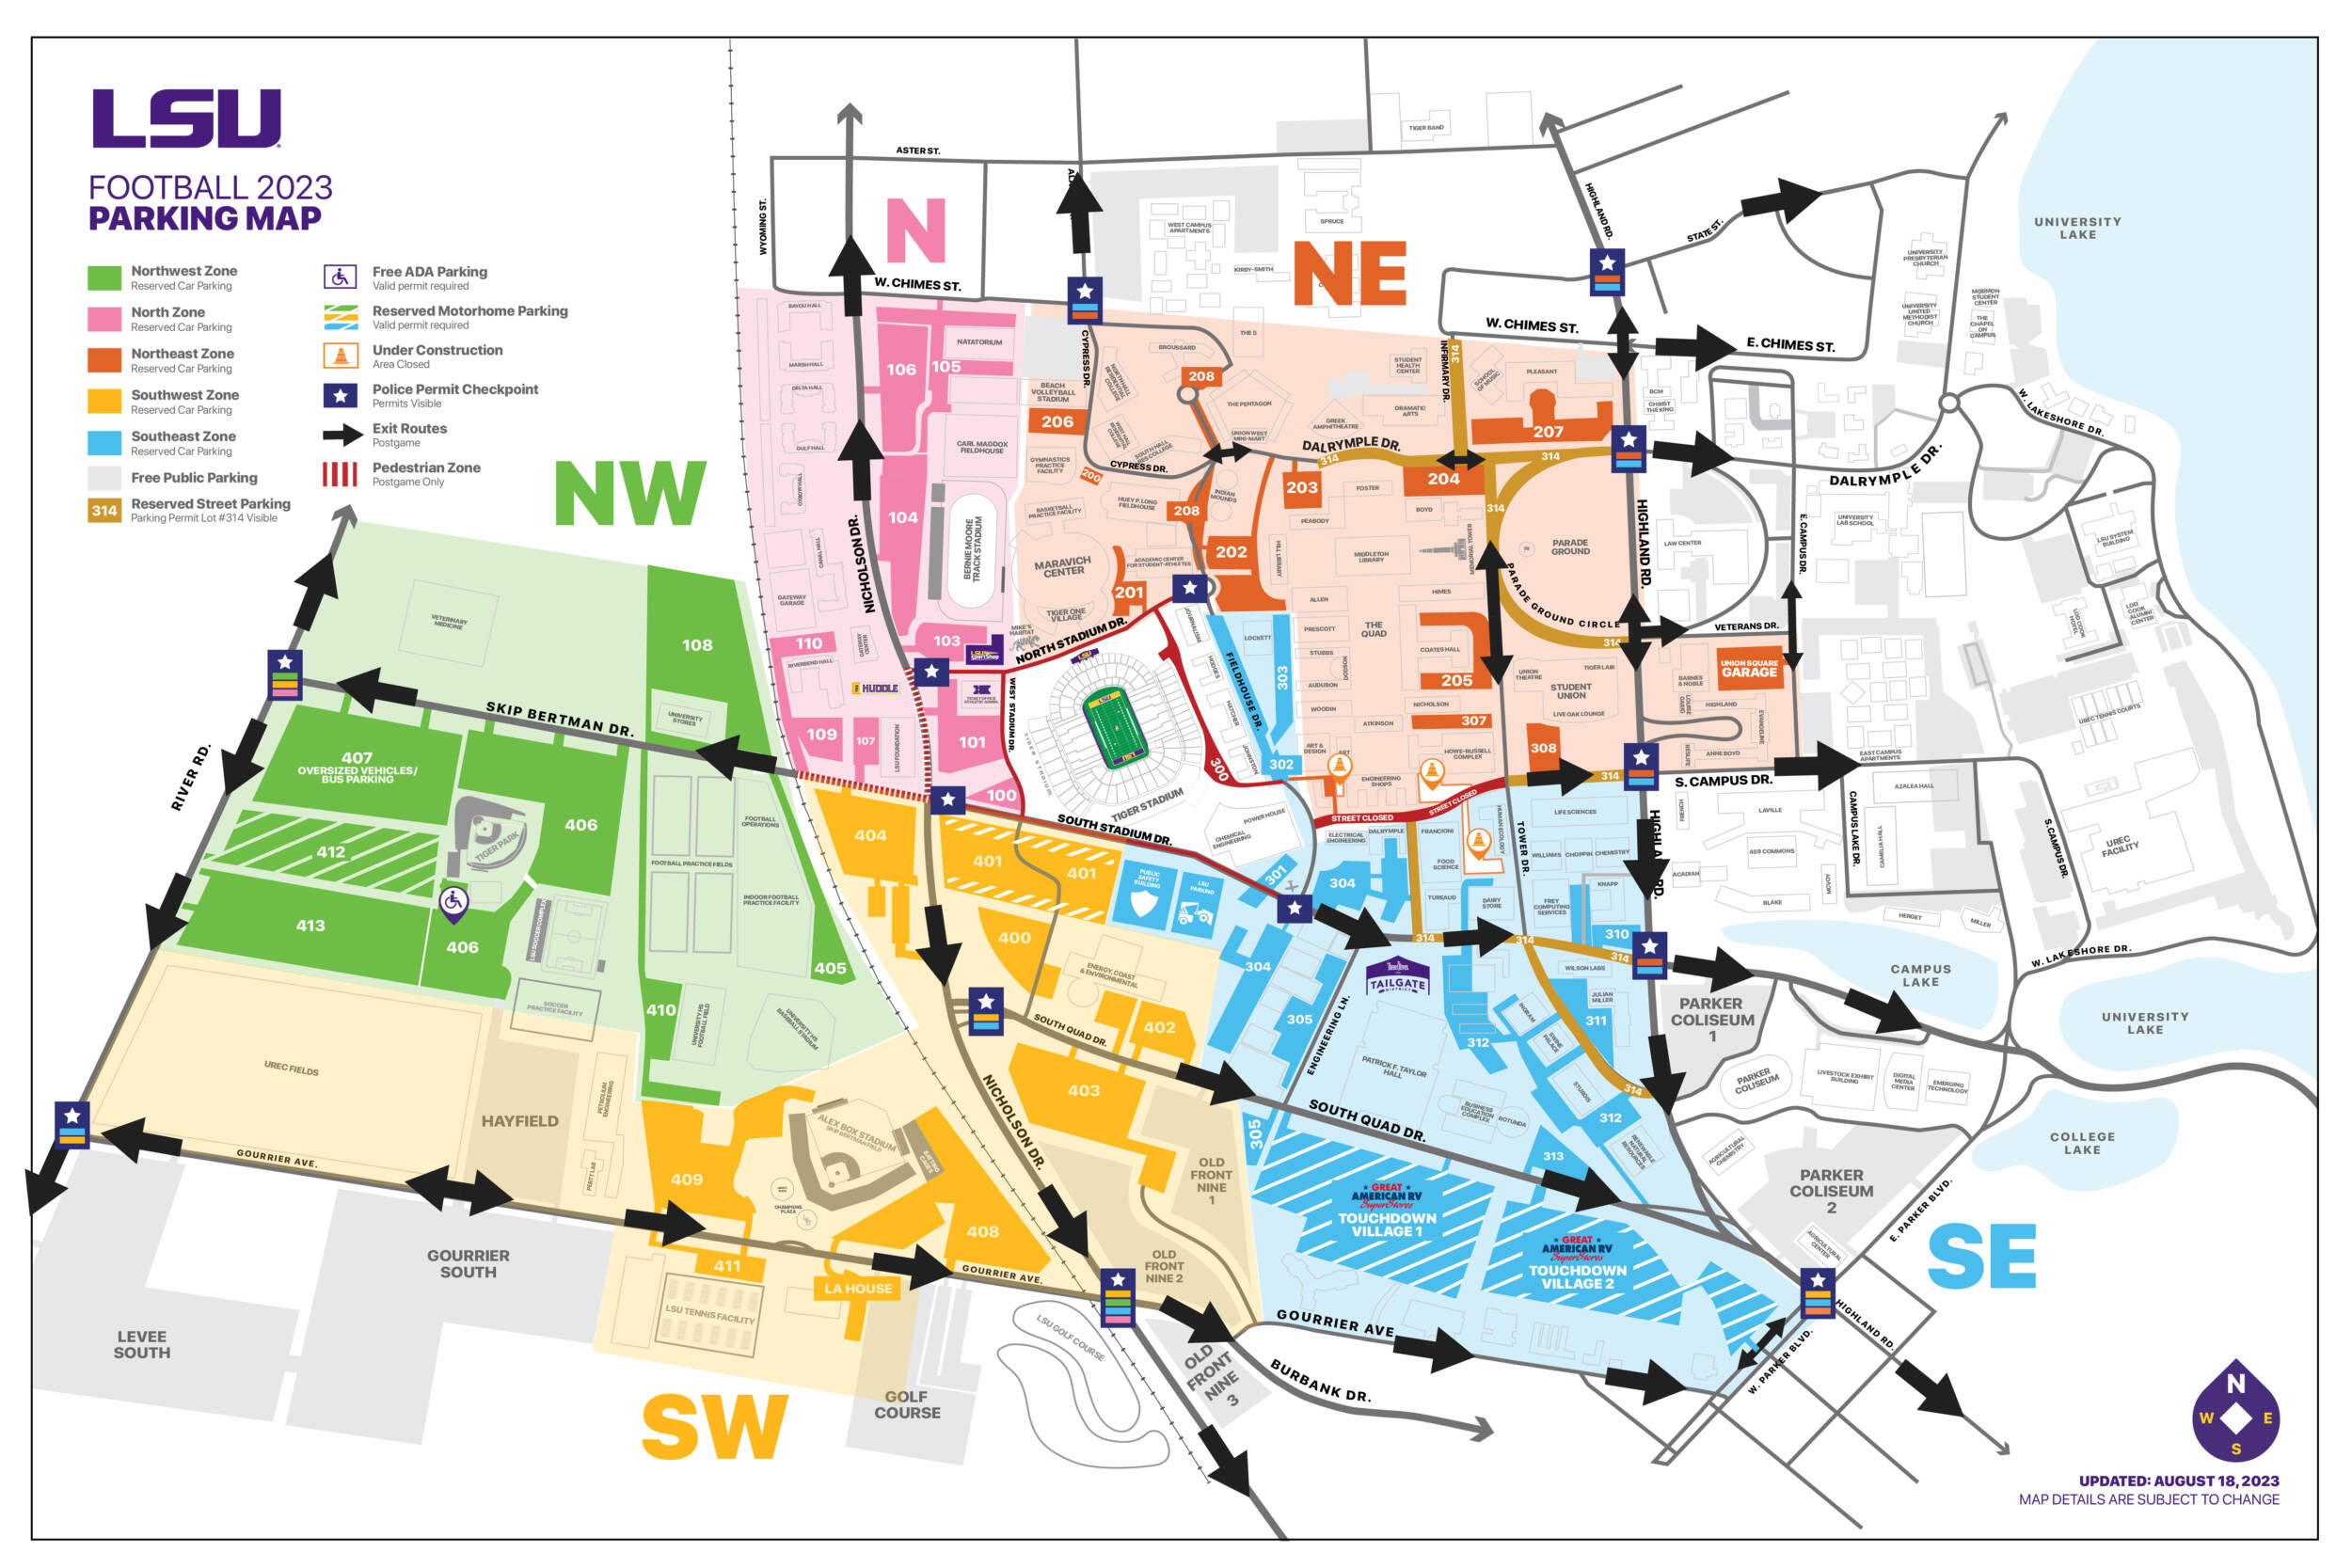 LSU Football Parking Map - All Zones